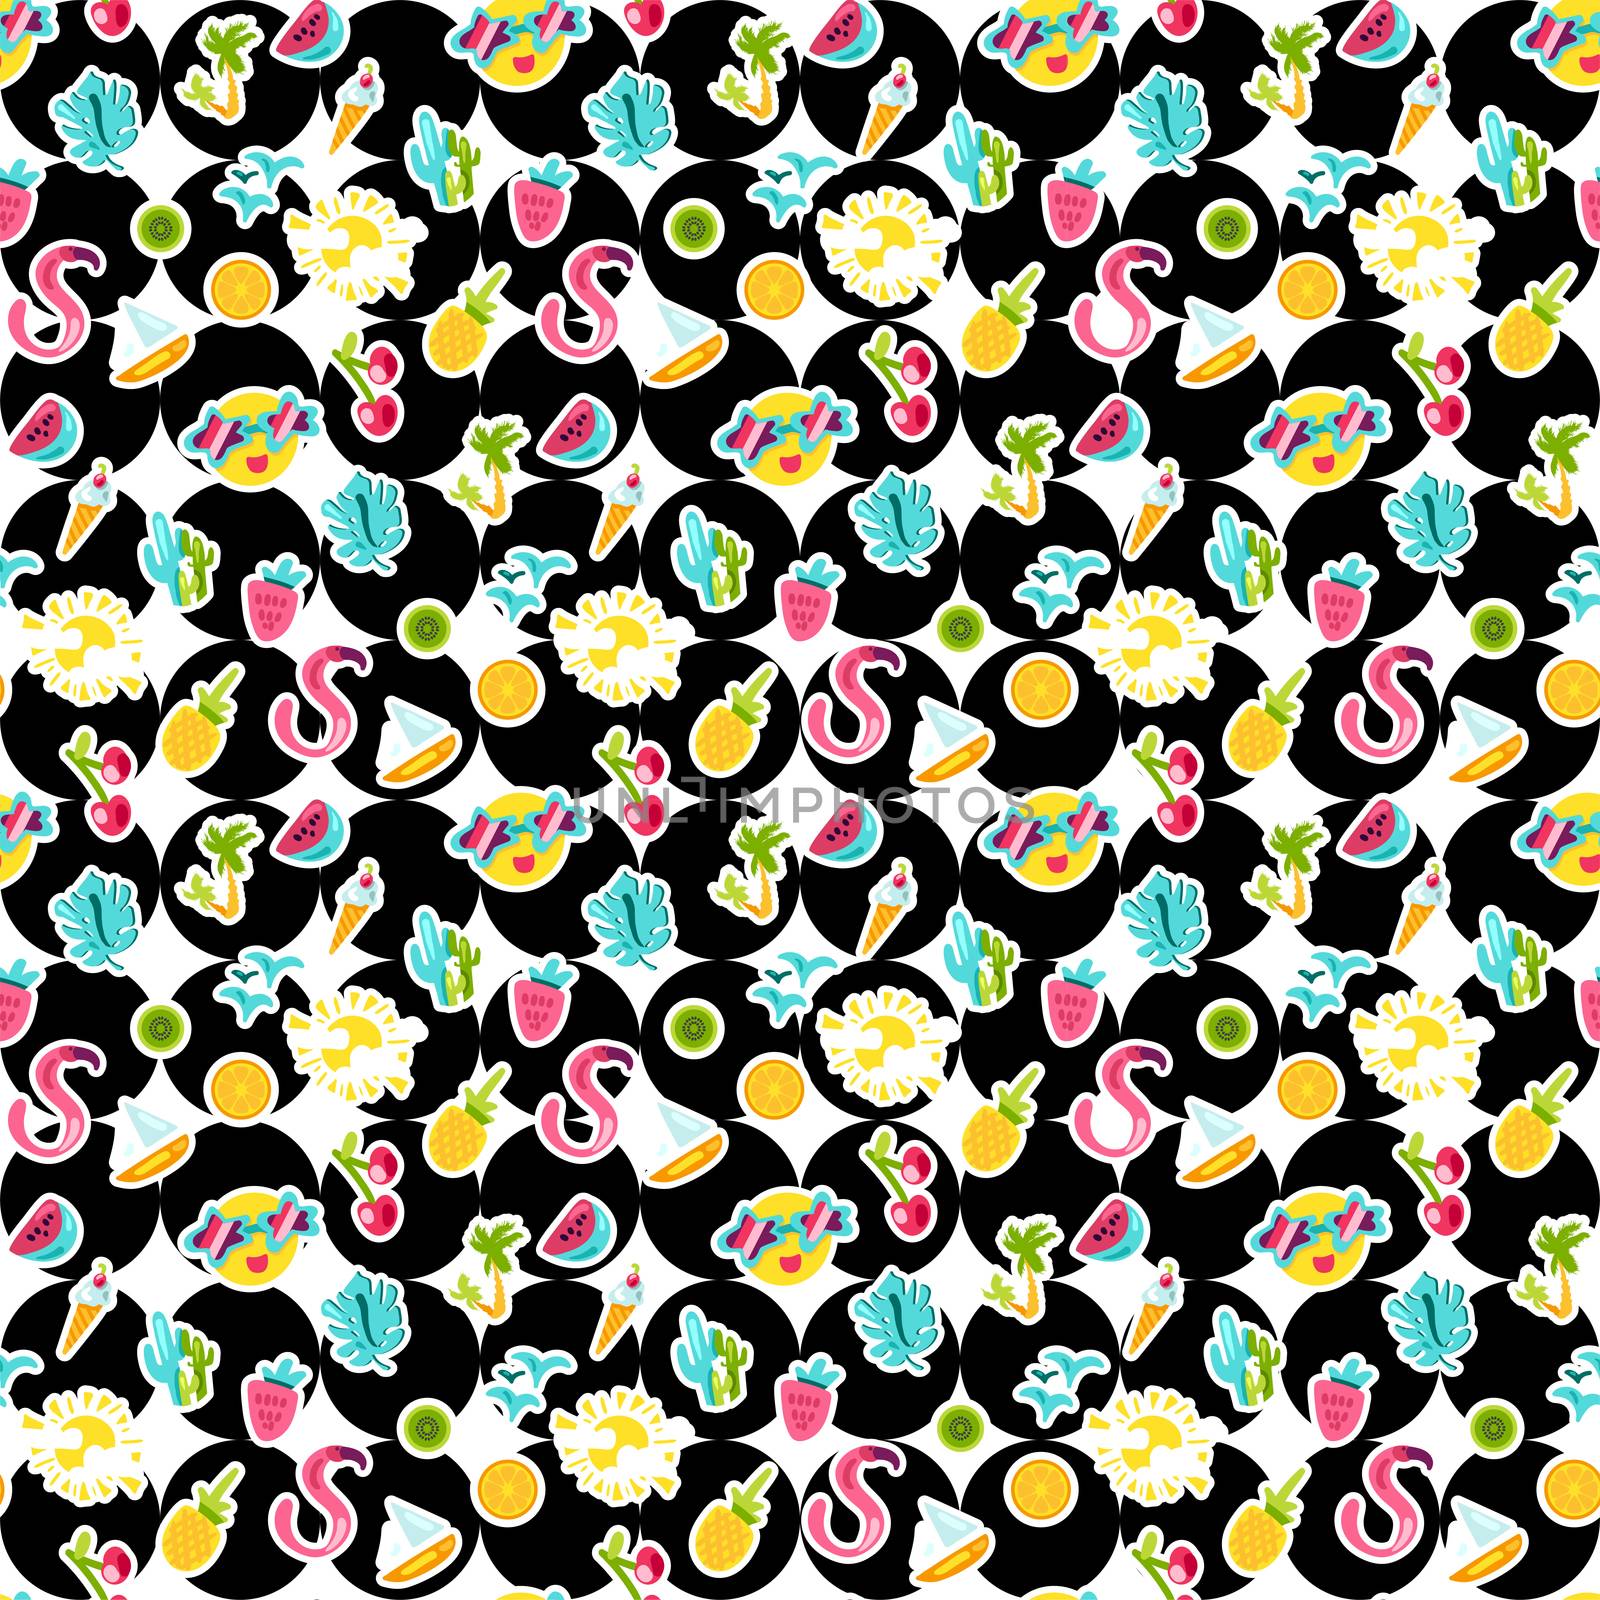 Summer stickers seamless pattern. Fruits, sun, berries. Vacation background with hand drawn cliparts